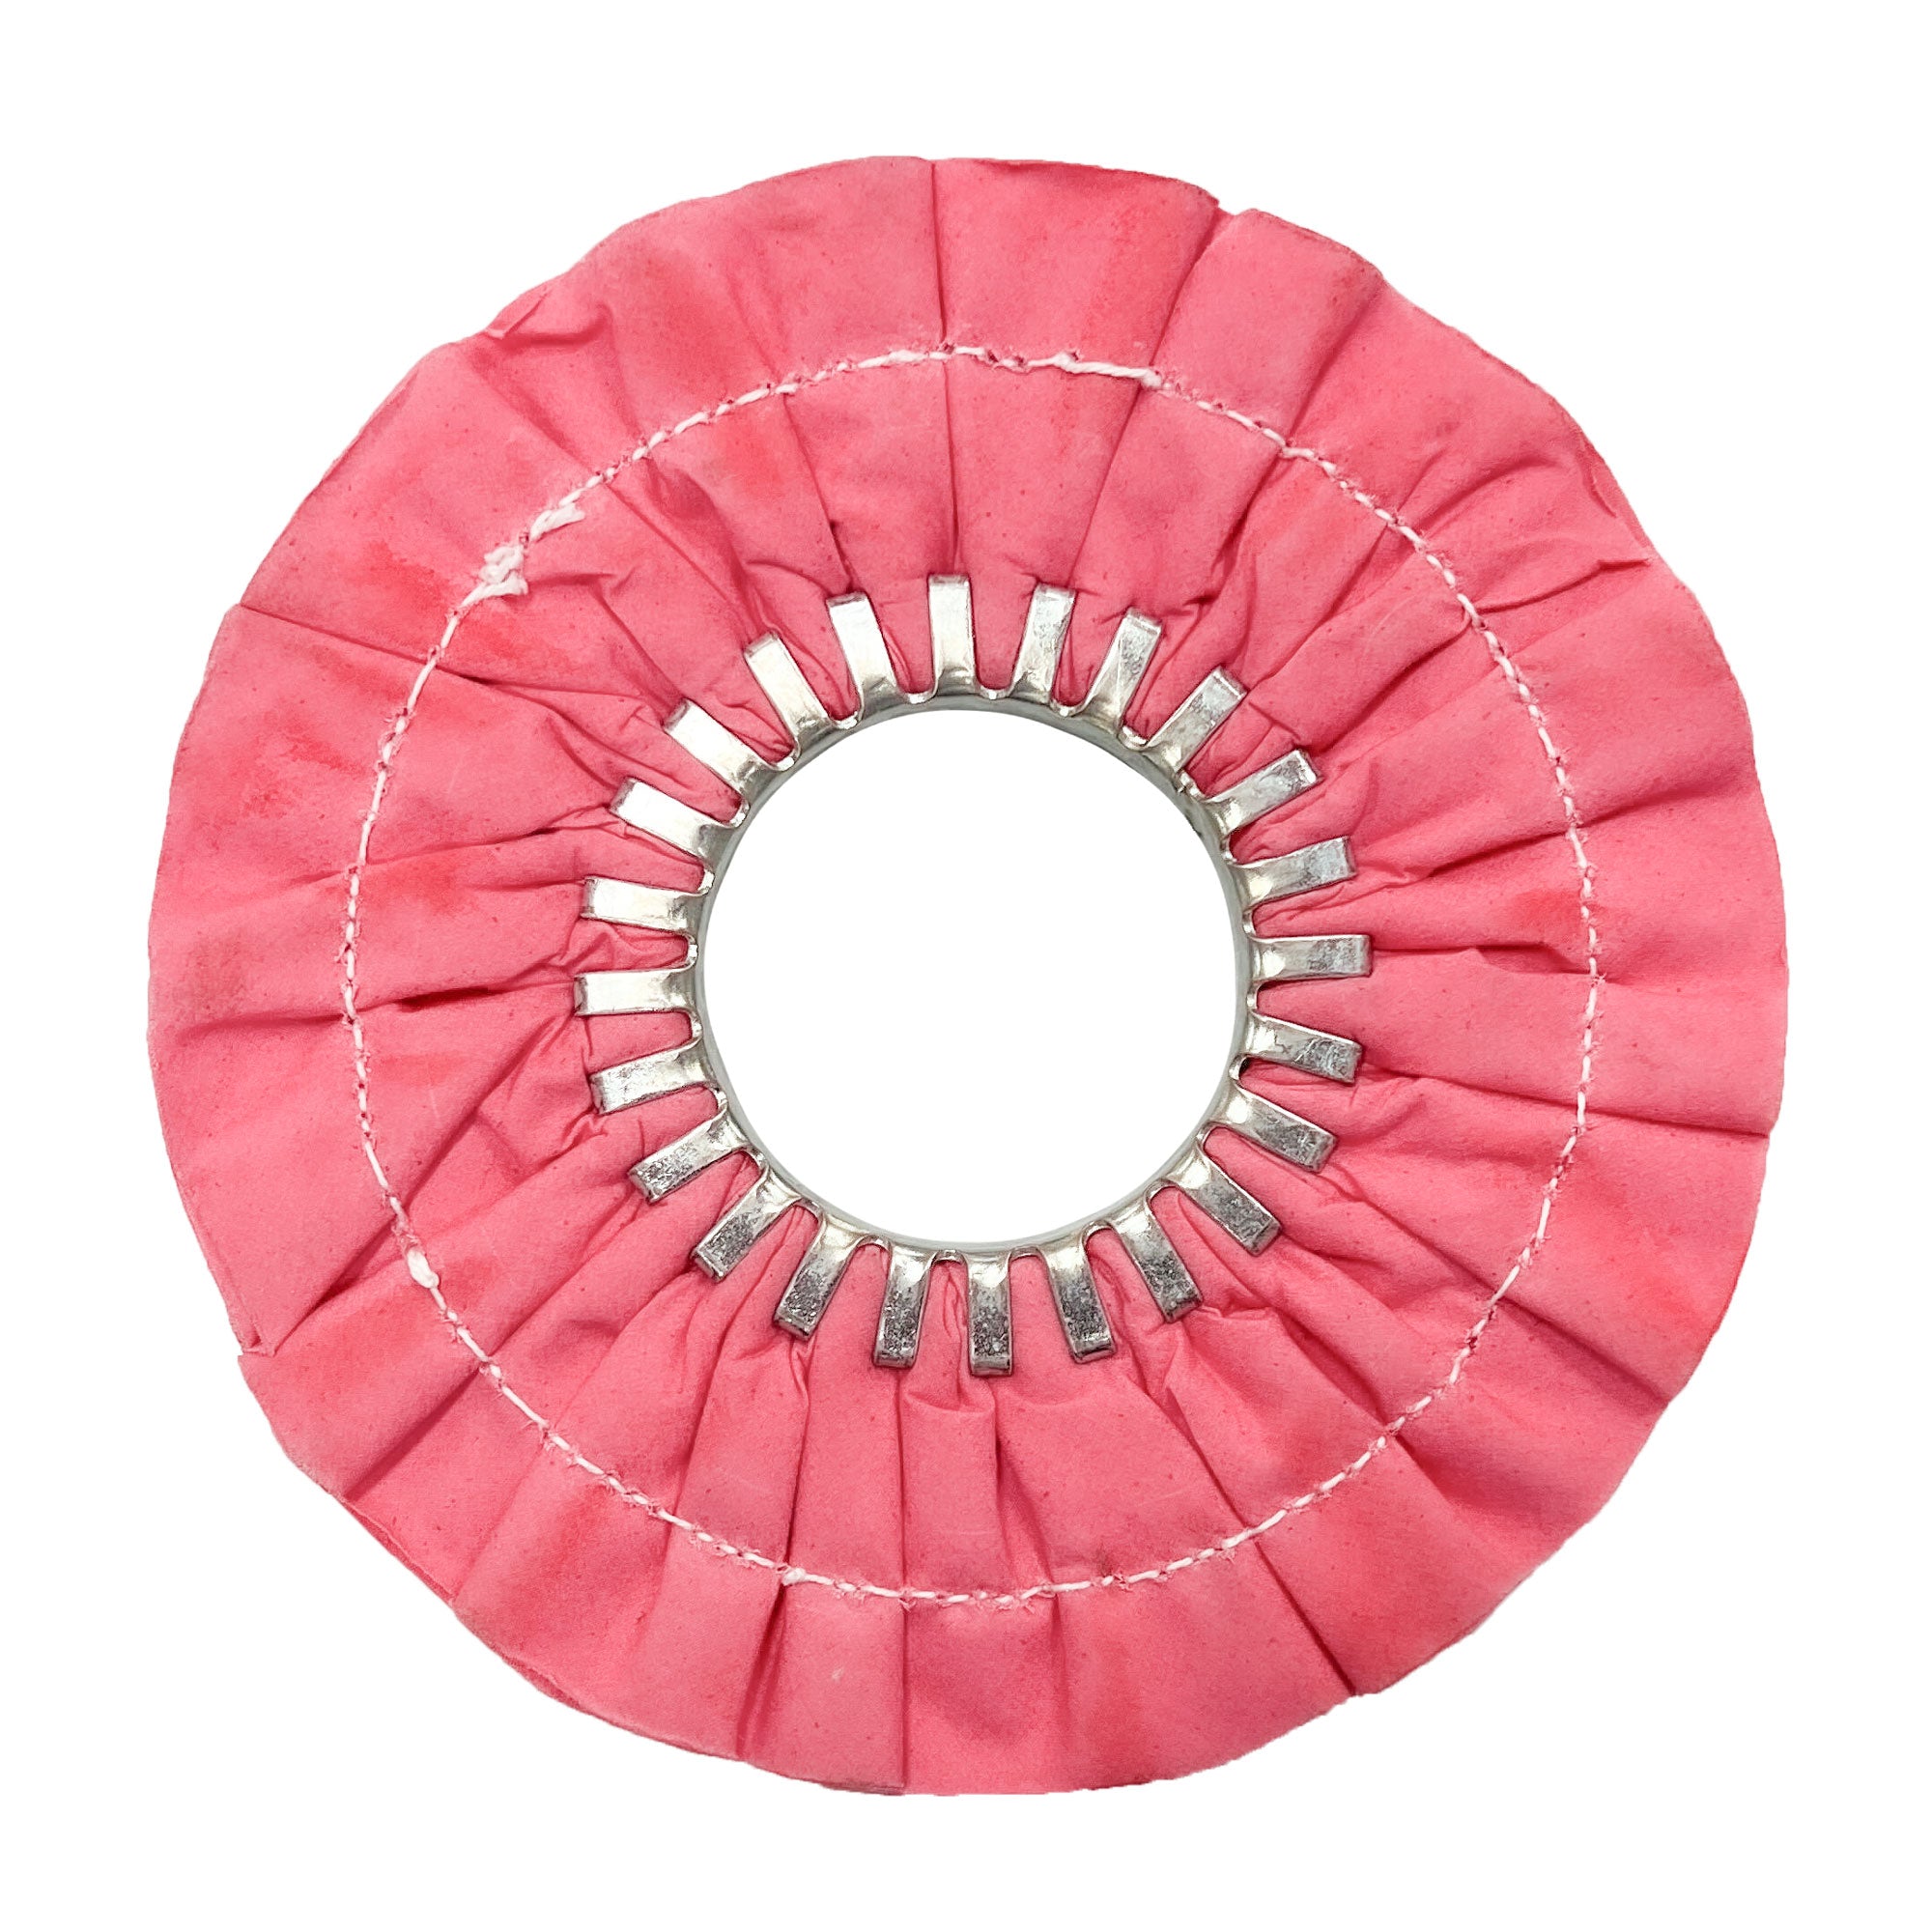 Renegade Products USA's pink 9" stitched airway buffing wheels, providing excellent polishing and buffing performance for a flawless finish